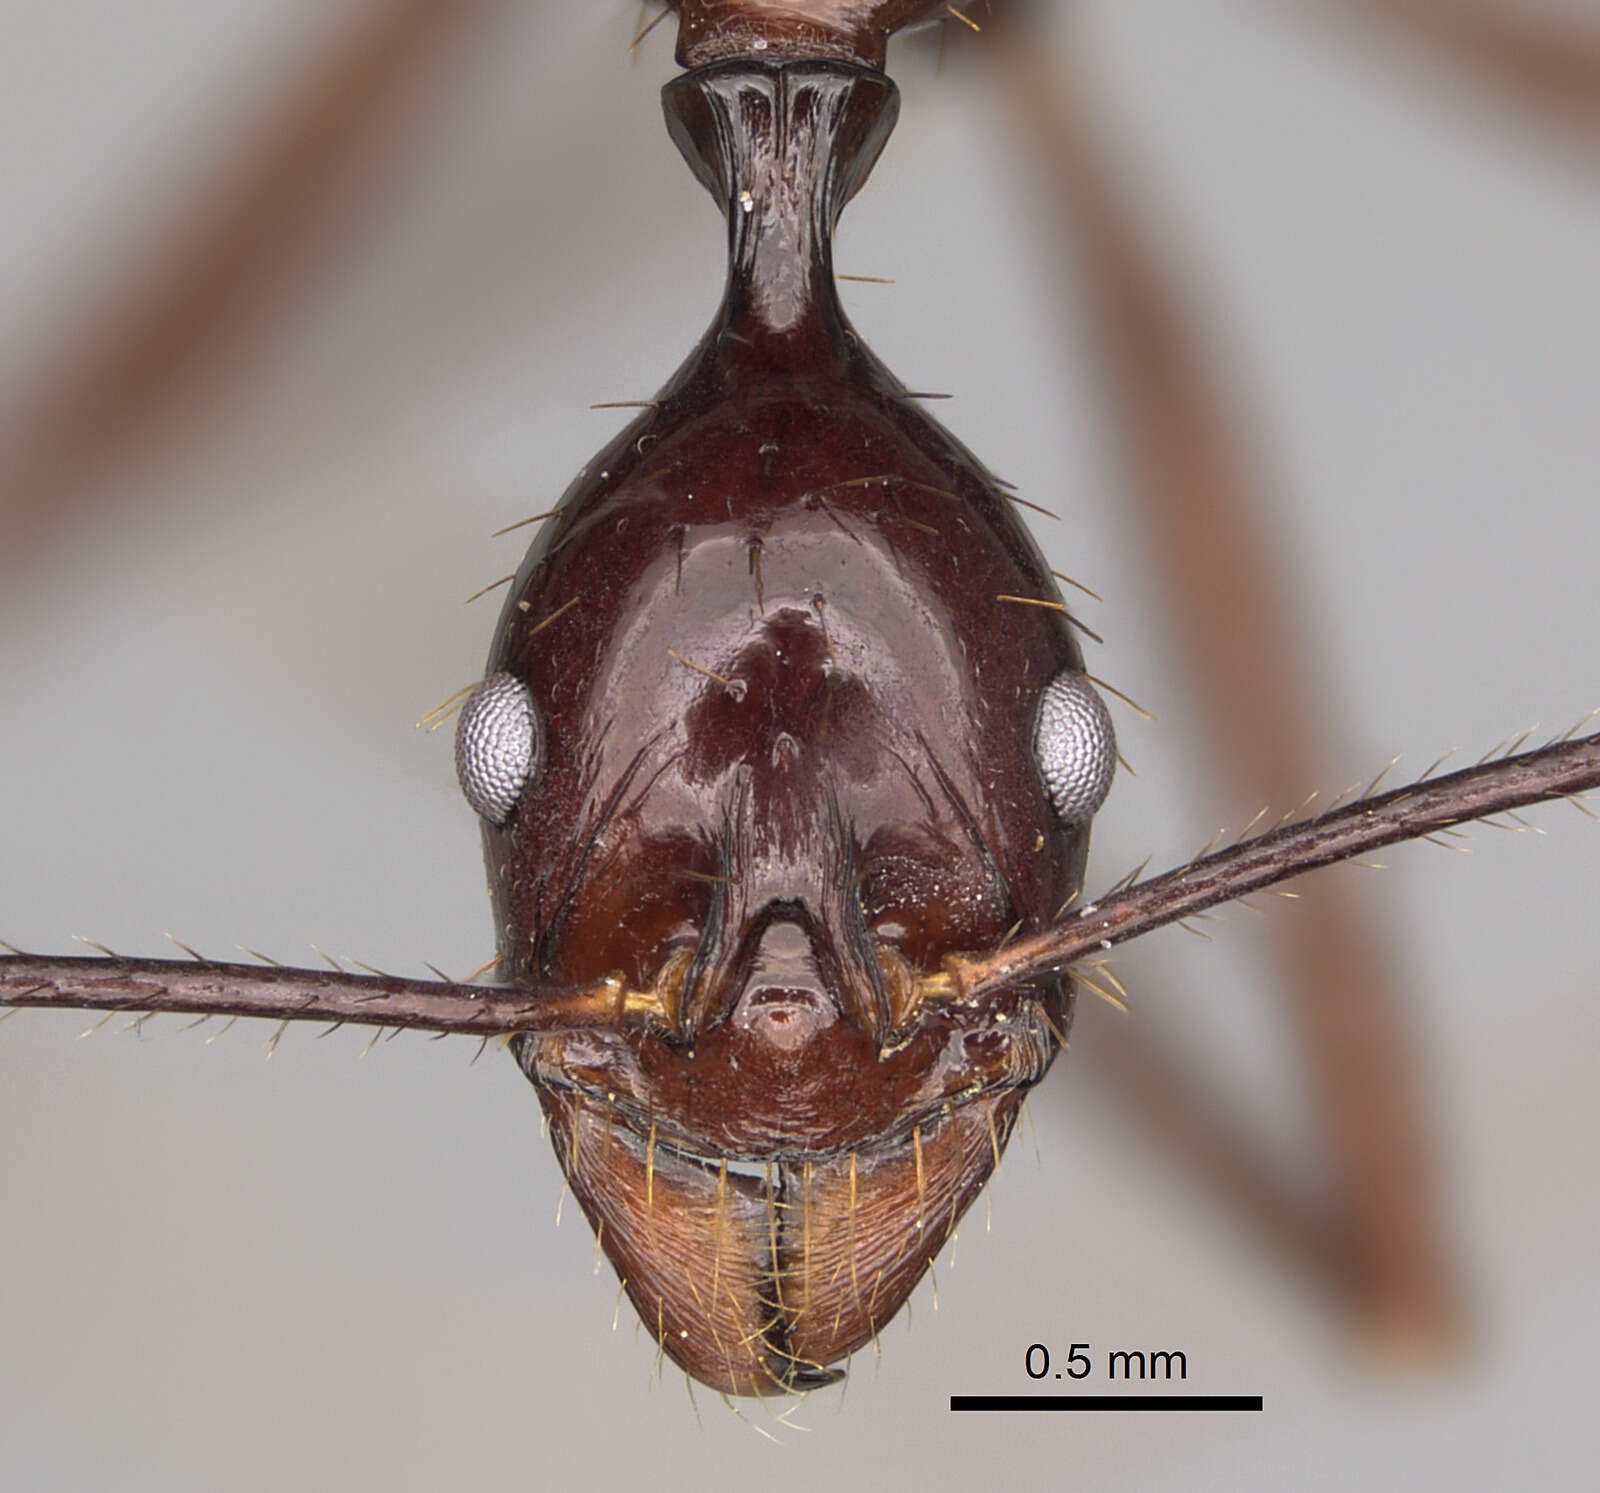 Image of Spine-waisted Ants